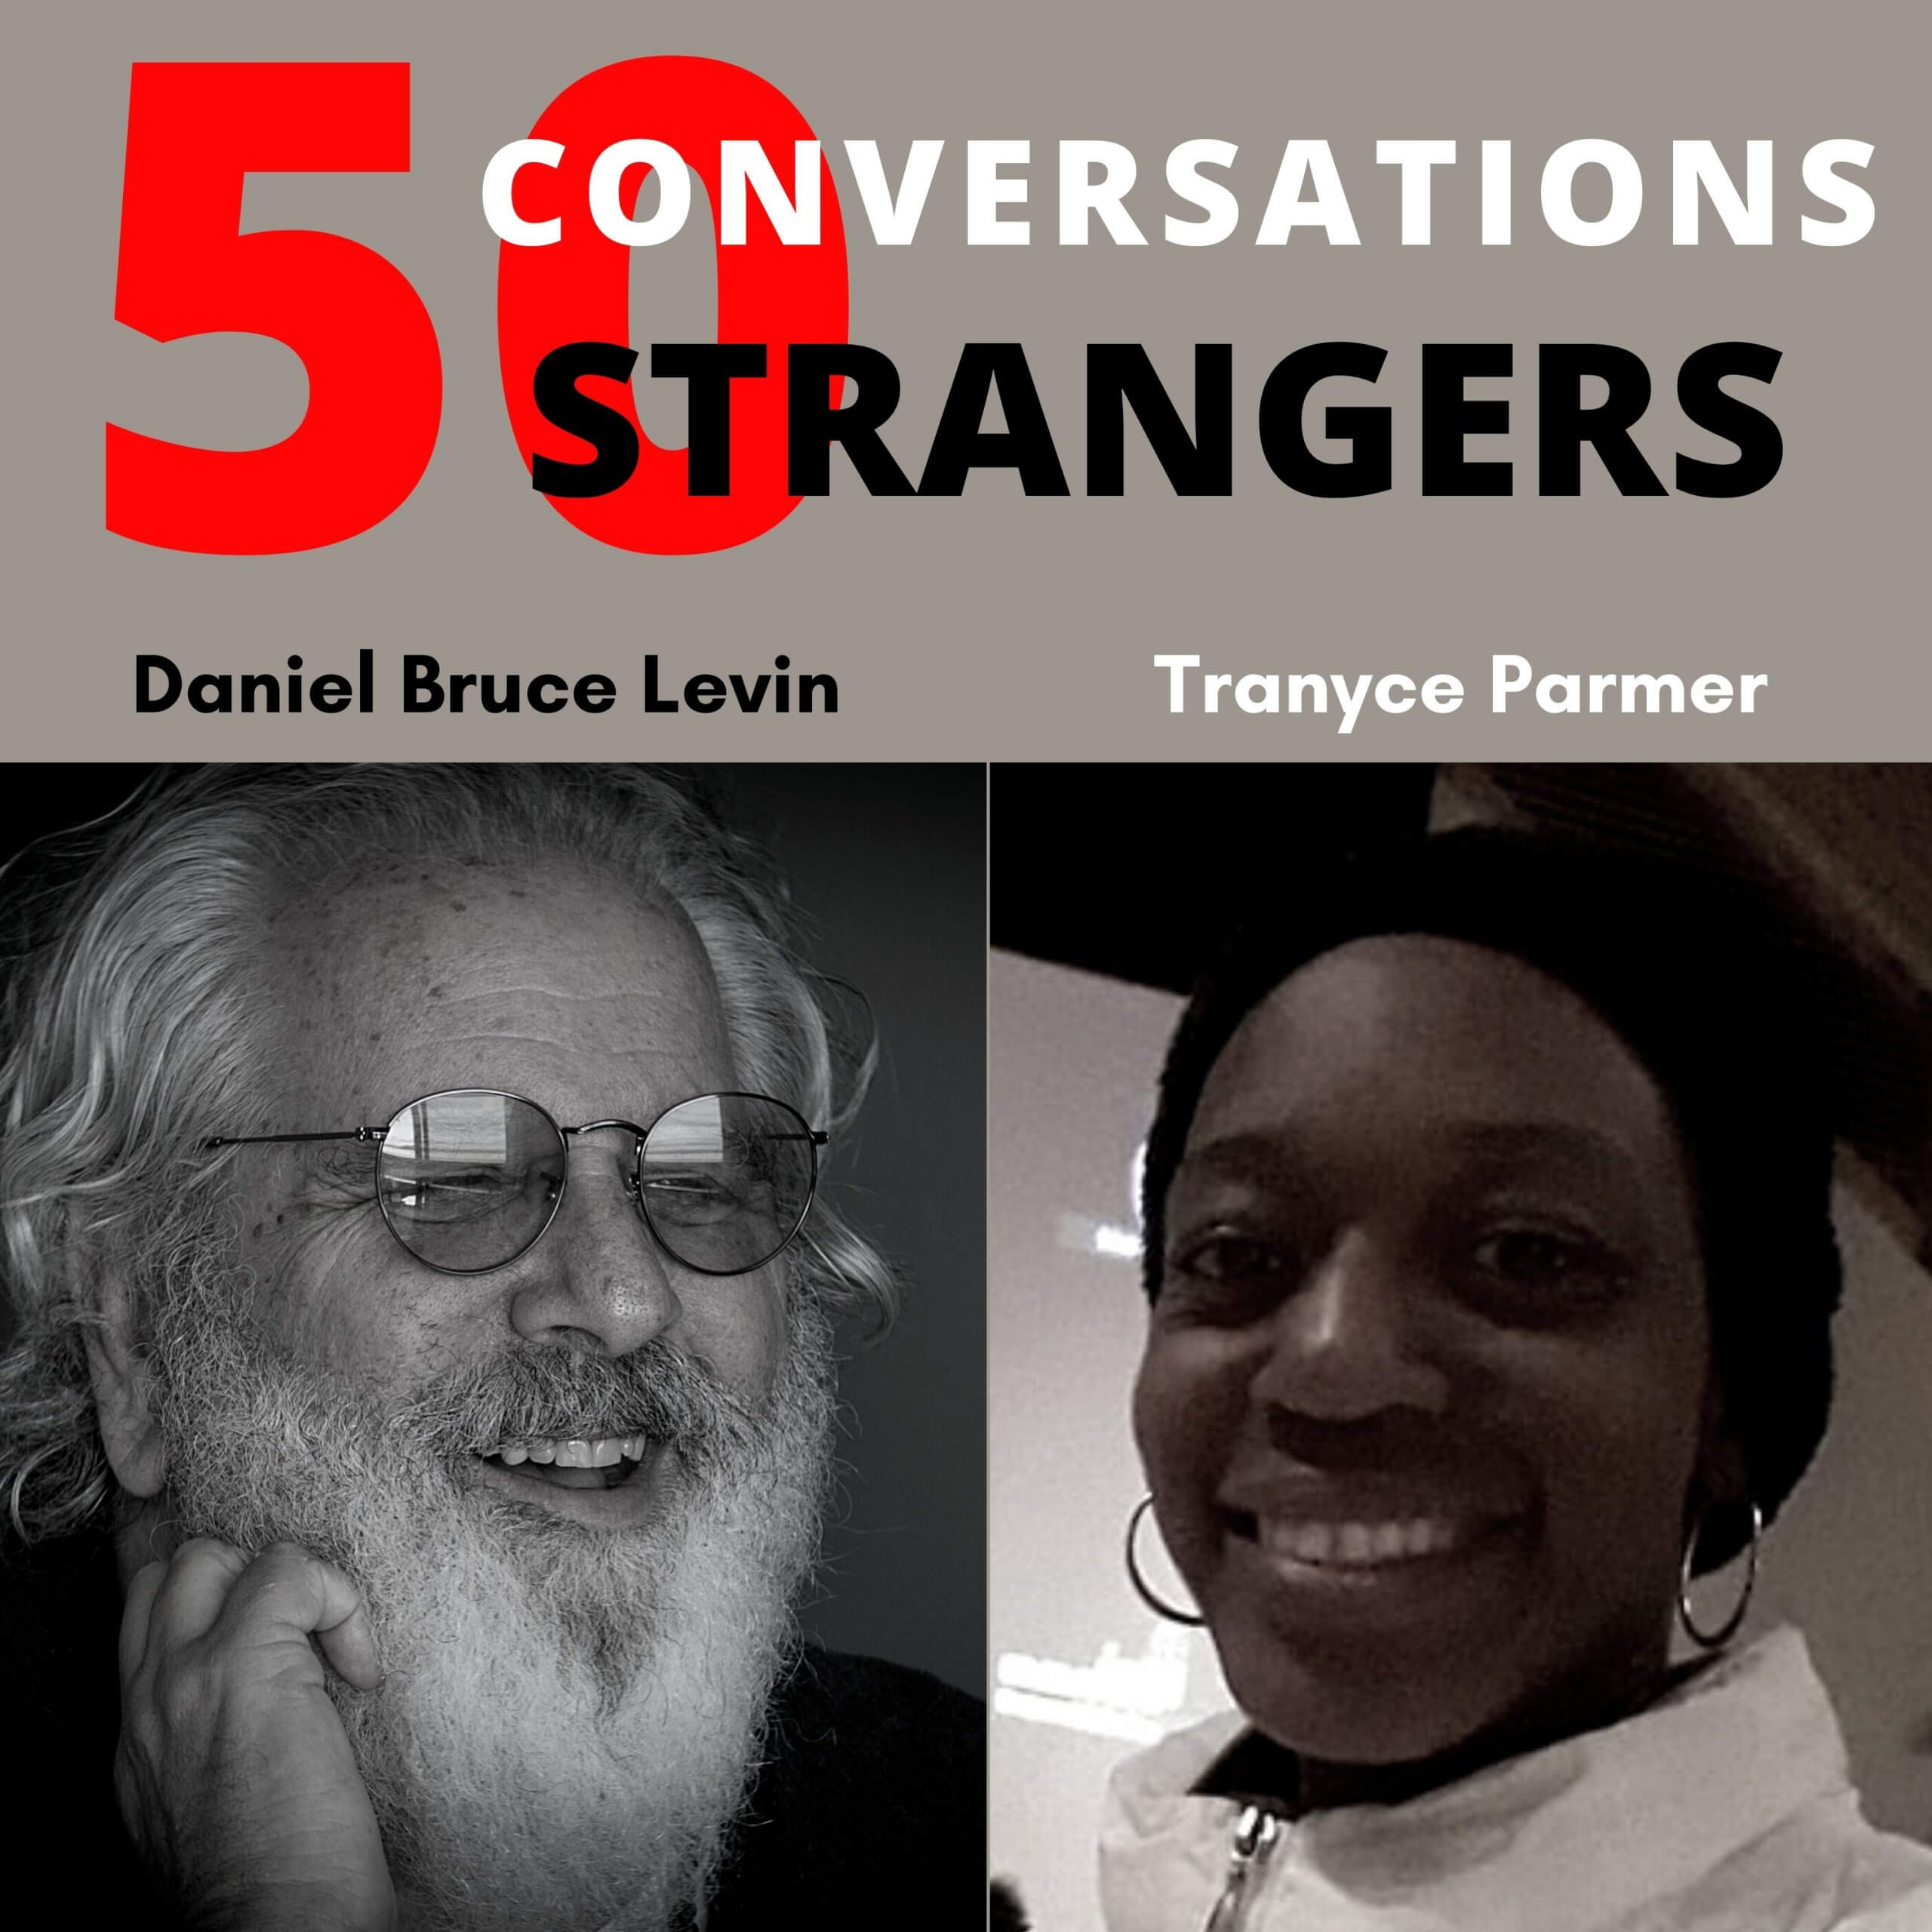 50 Conversations with 50 Strangers with Tranyce Parmer